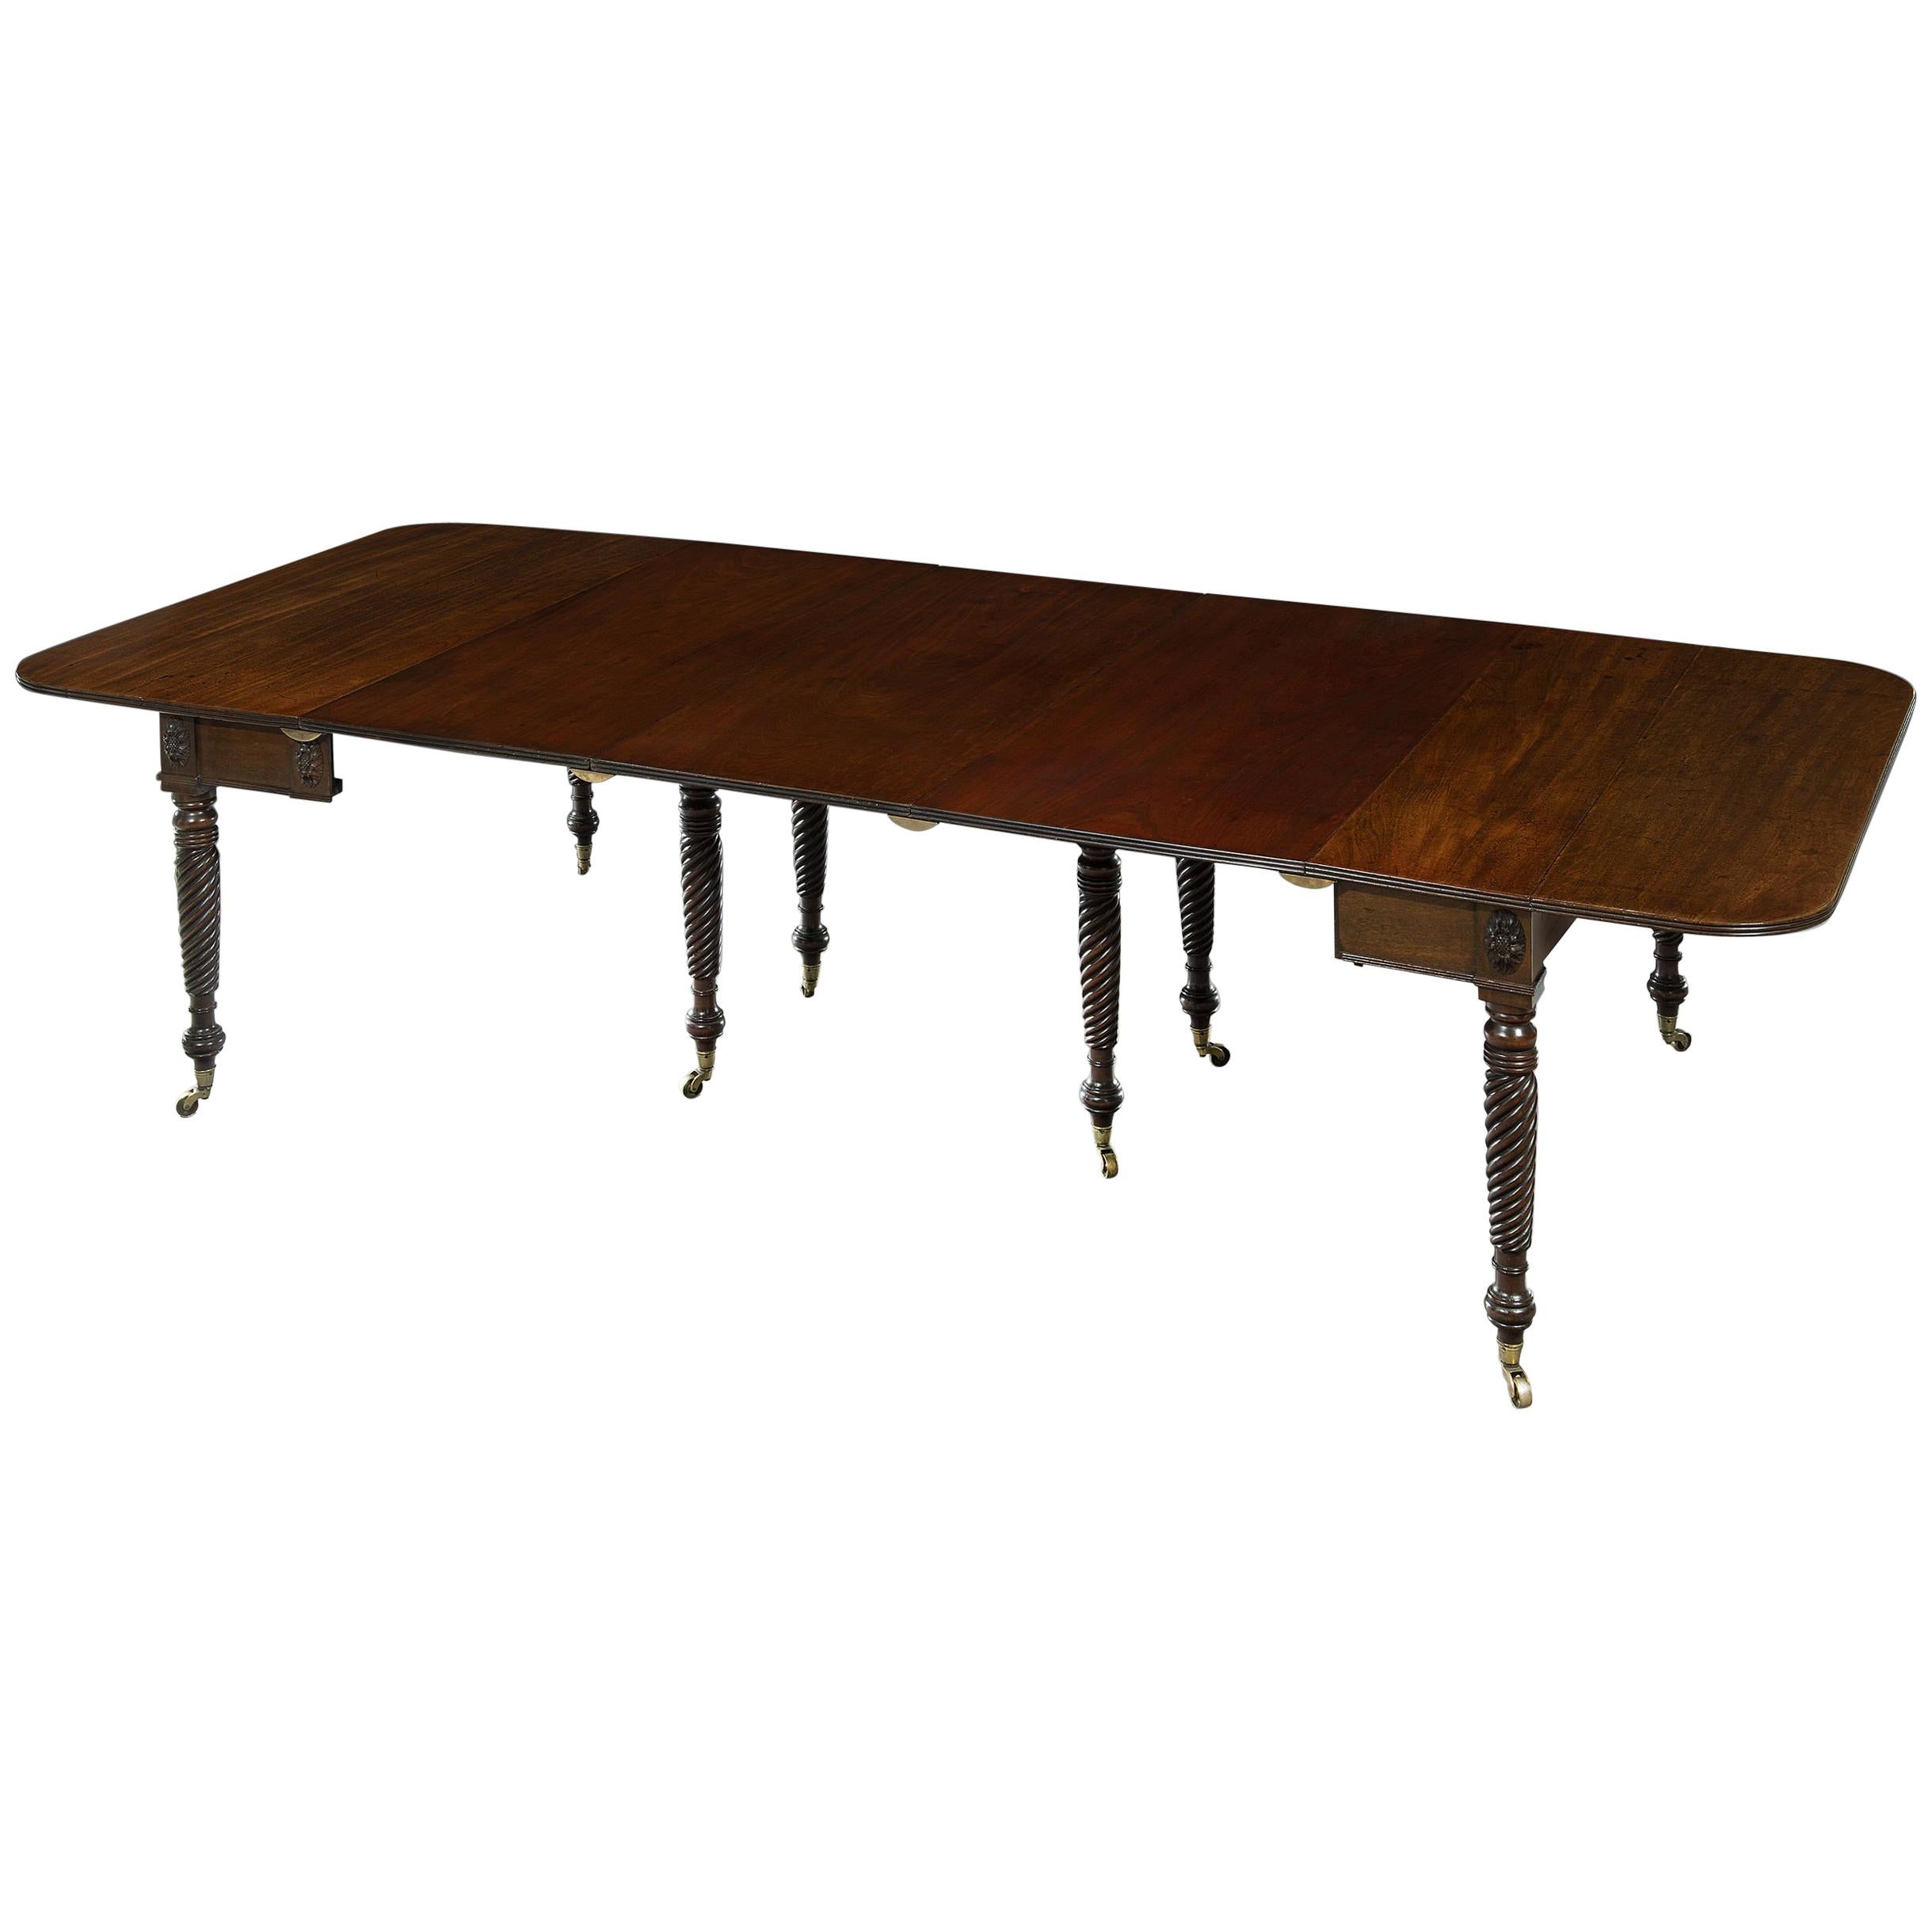 Late George III Period Concertina Mahogany Extending Dining Table For Sale